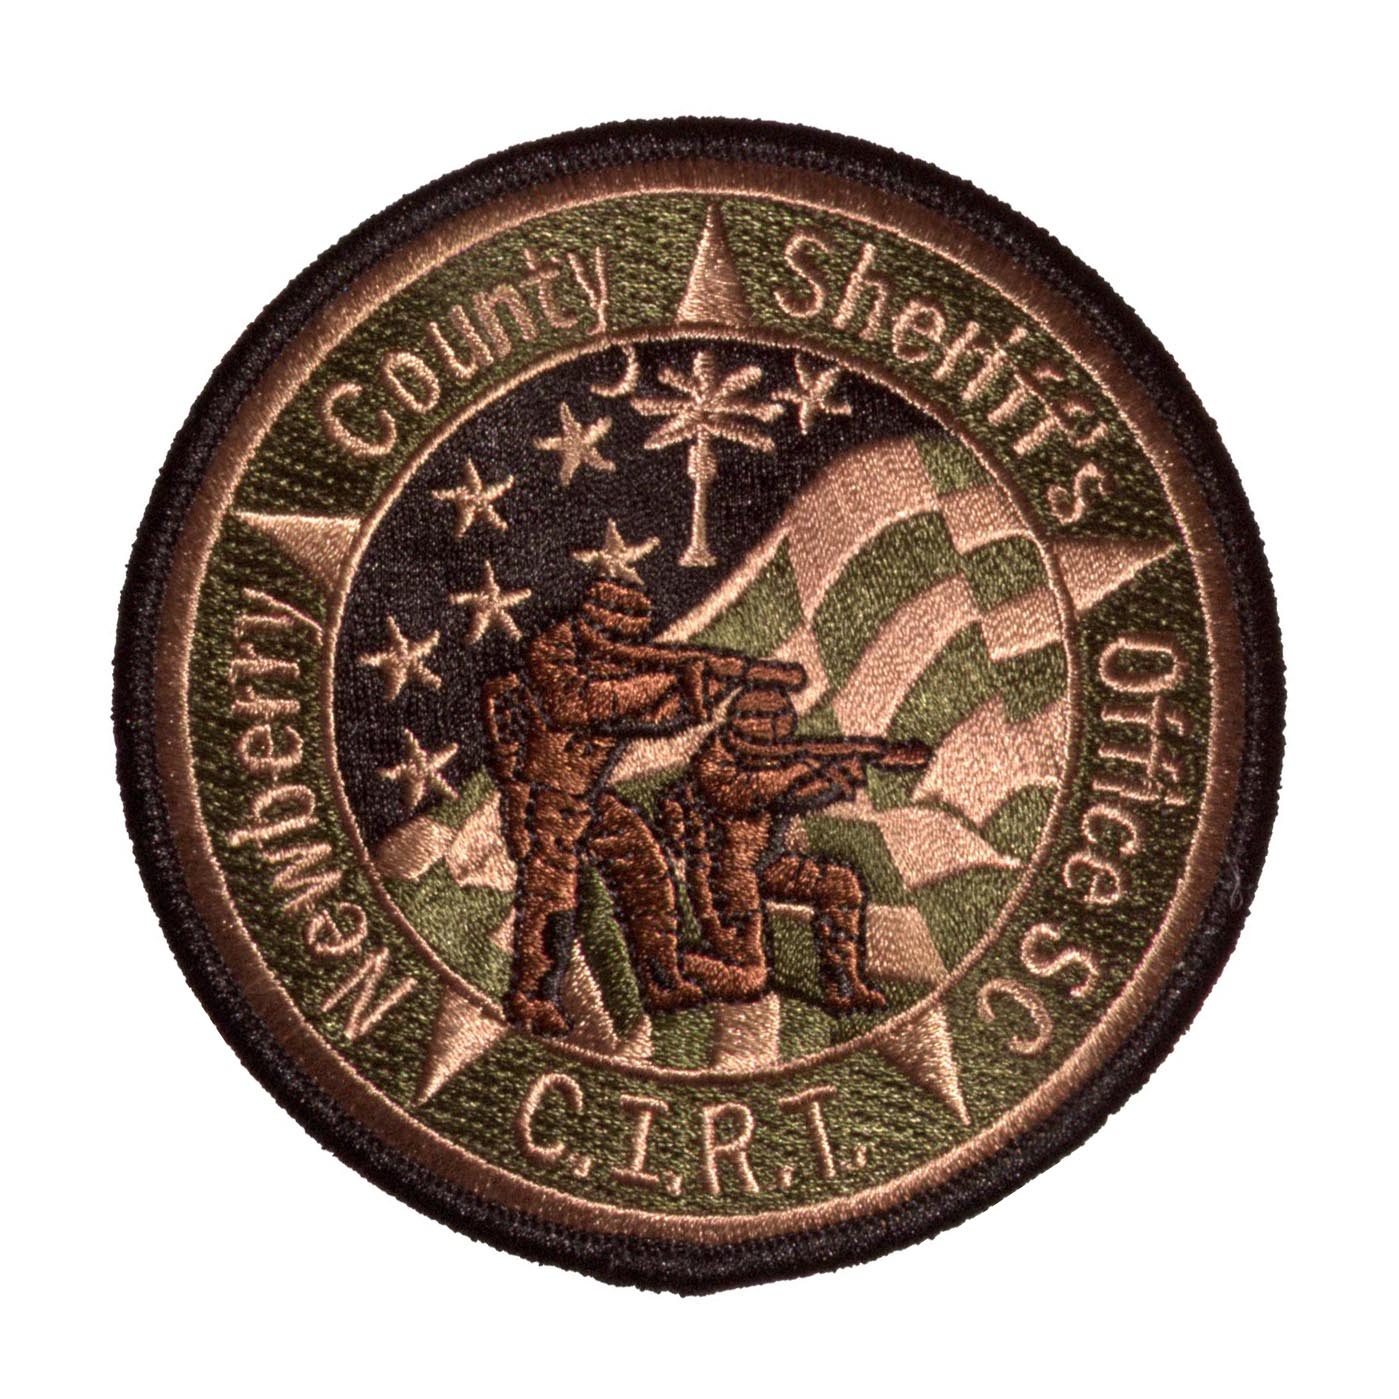 County Sheriff patches